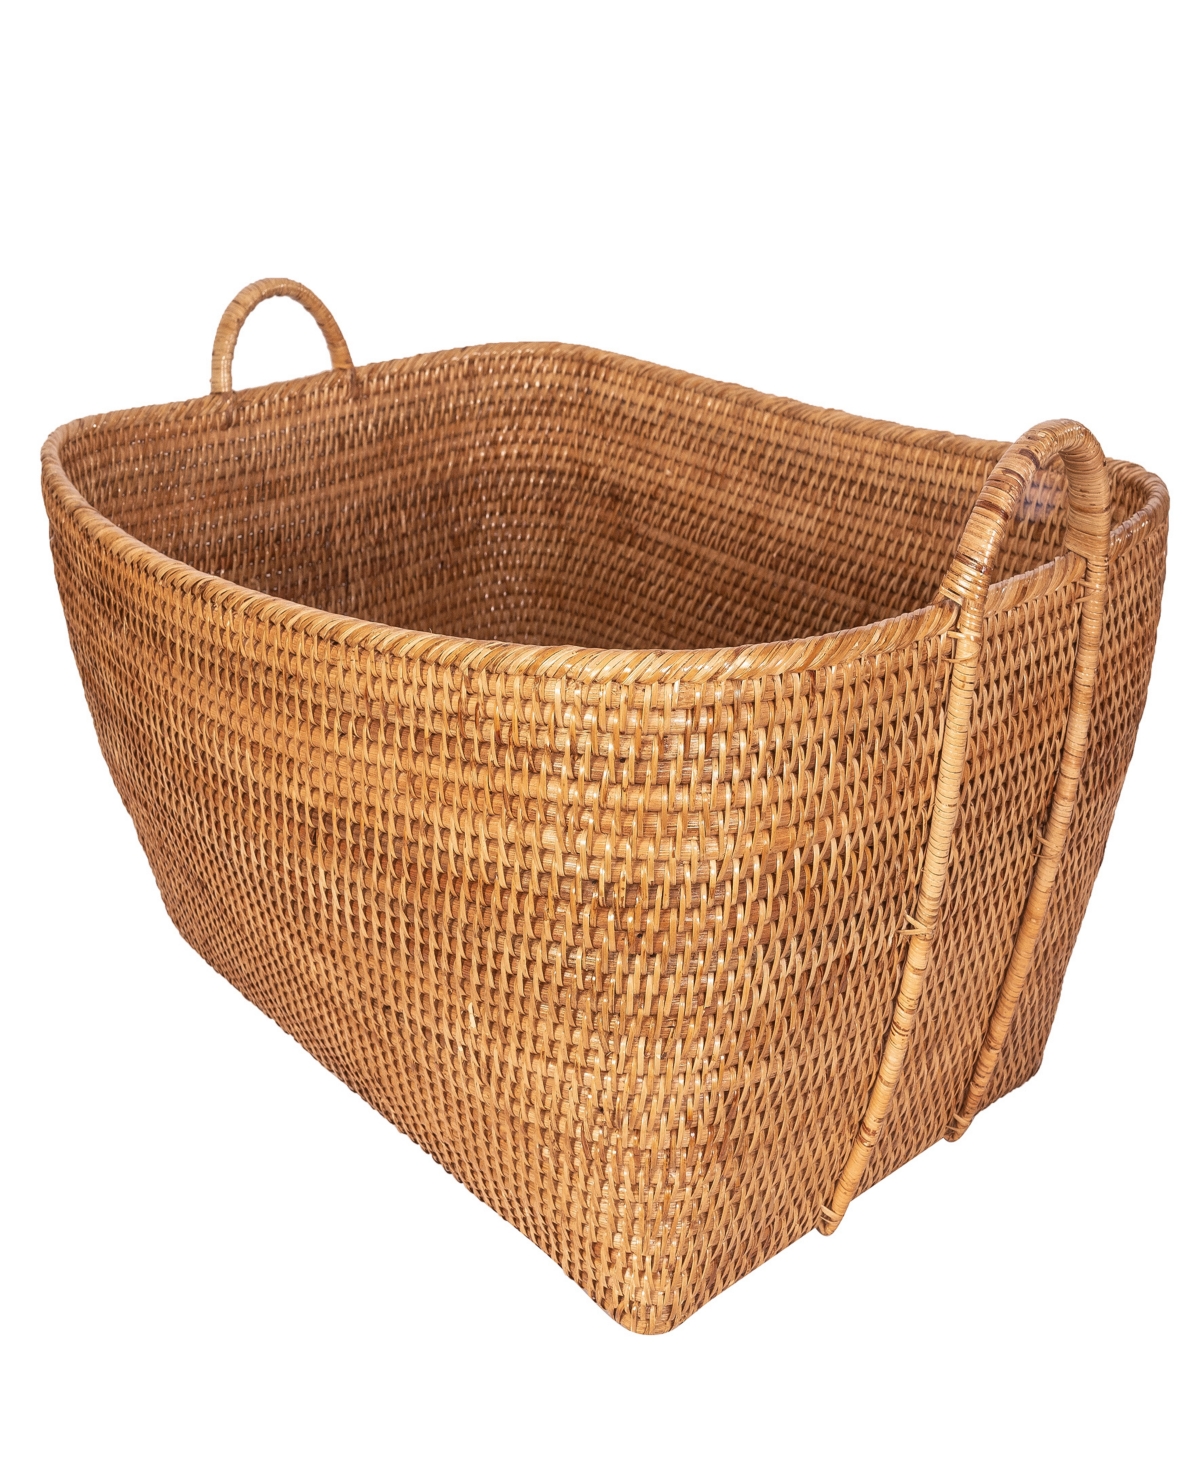 Shop Artifacts Trading Company Saboga Home Everything Basket With Hoop Handles In Honey Brown